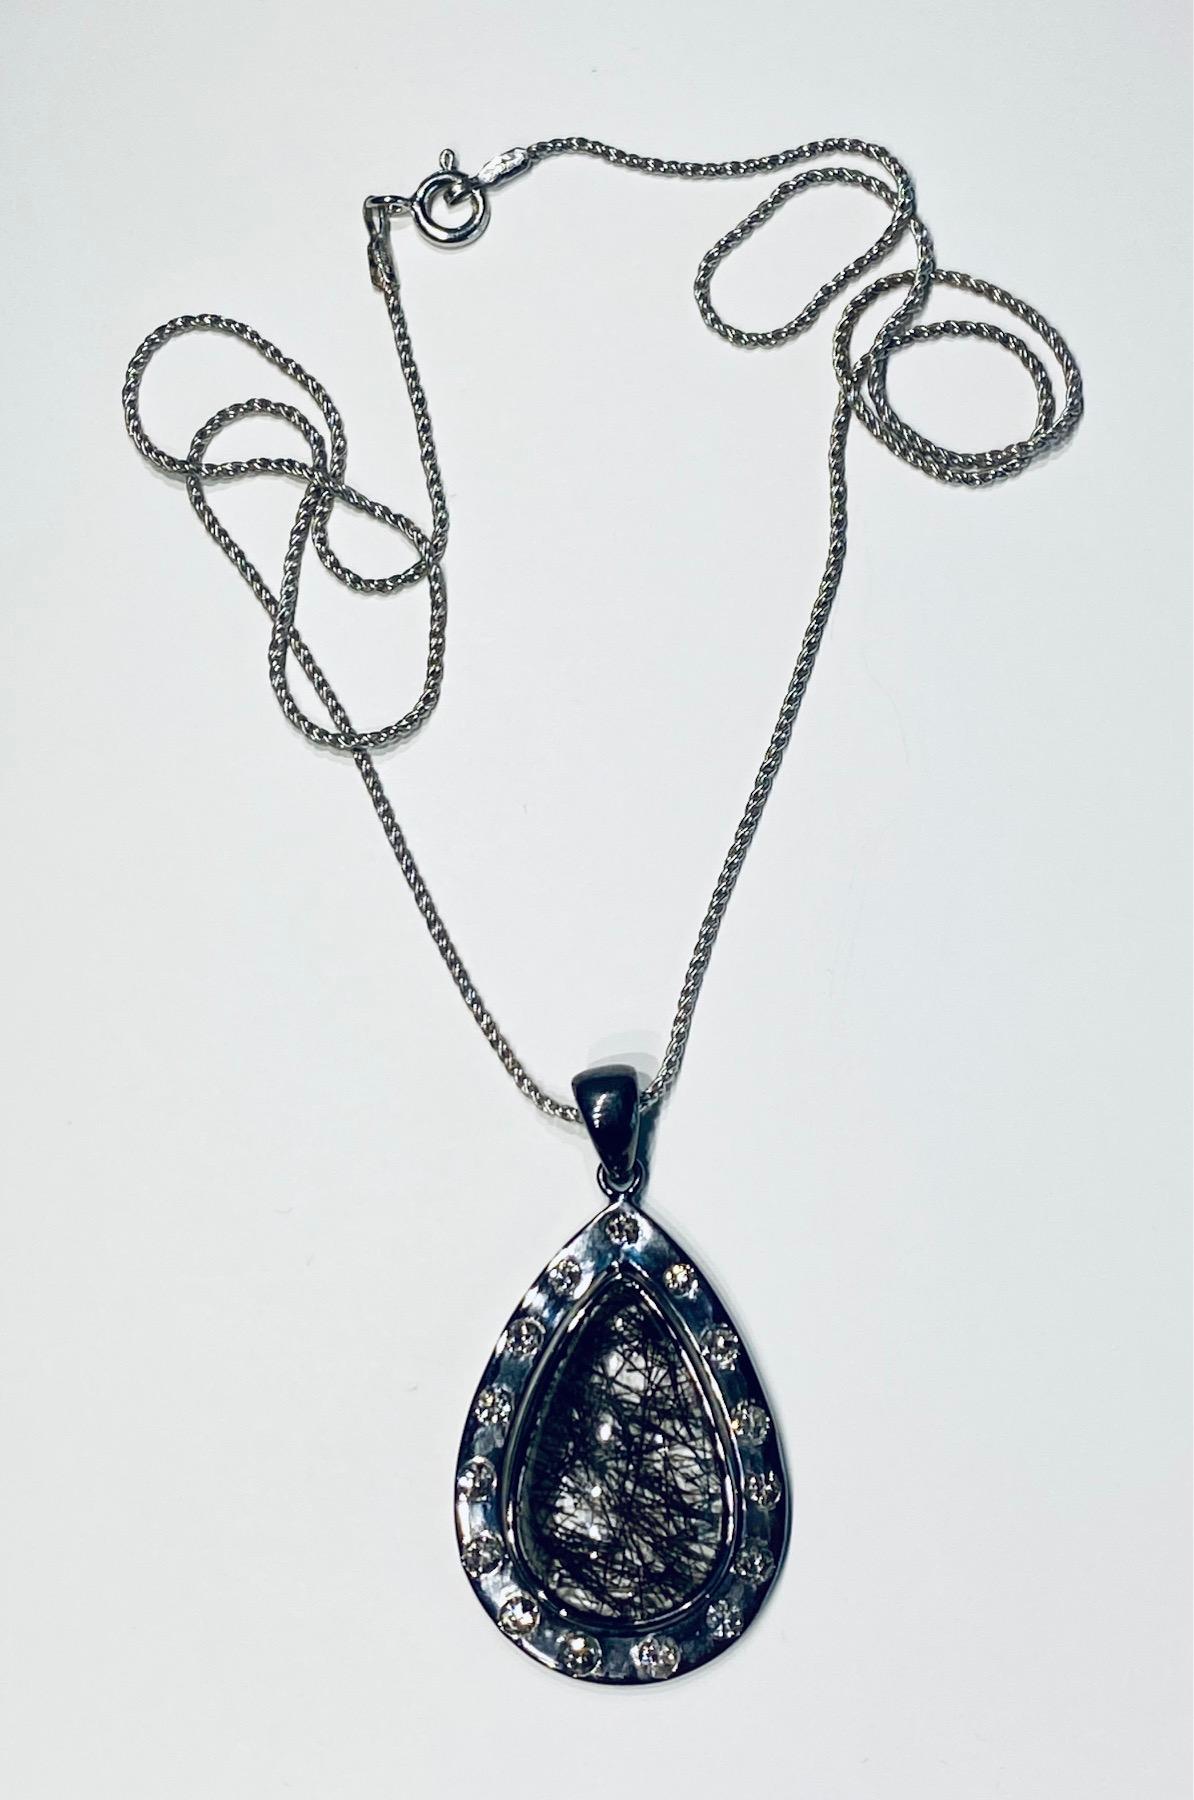 Kary Adam Designed, Blackened Silver Pendant with Grafetite Quartz surrounded by Diamonds on an 18